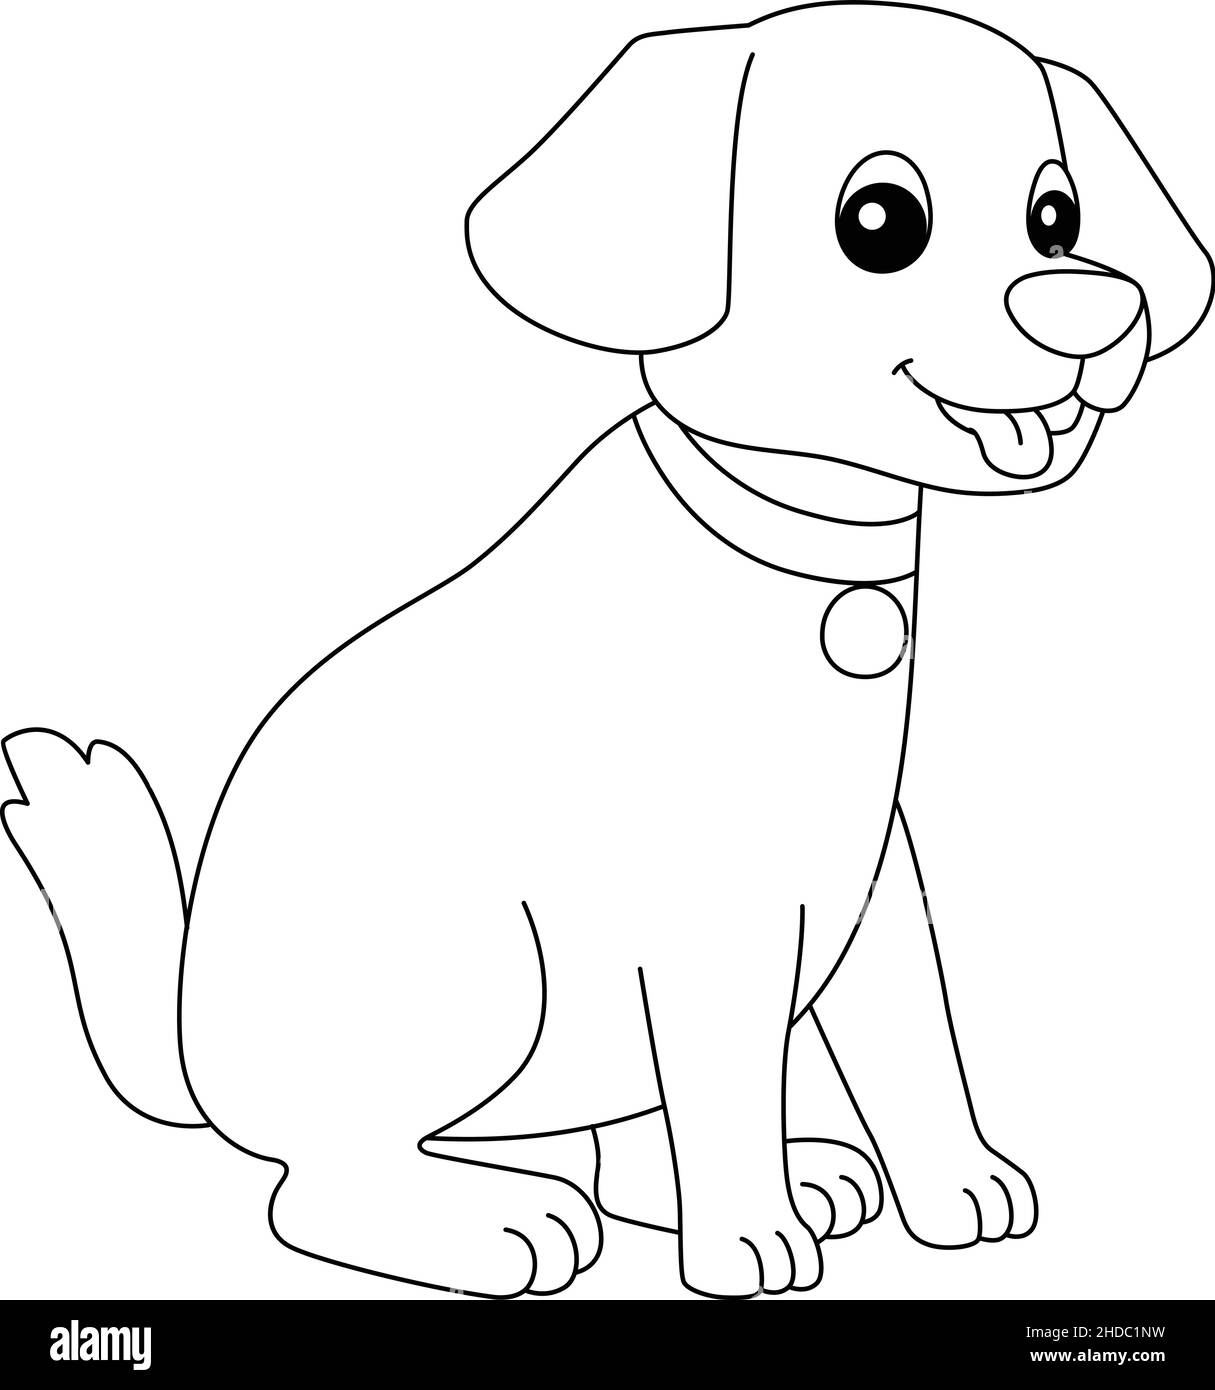 Dog Coloring Page Isolated For Kids Stock Vector Image & Art - Alamy